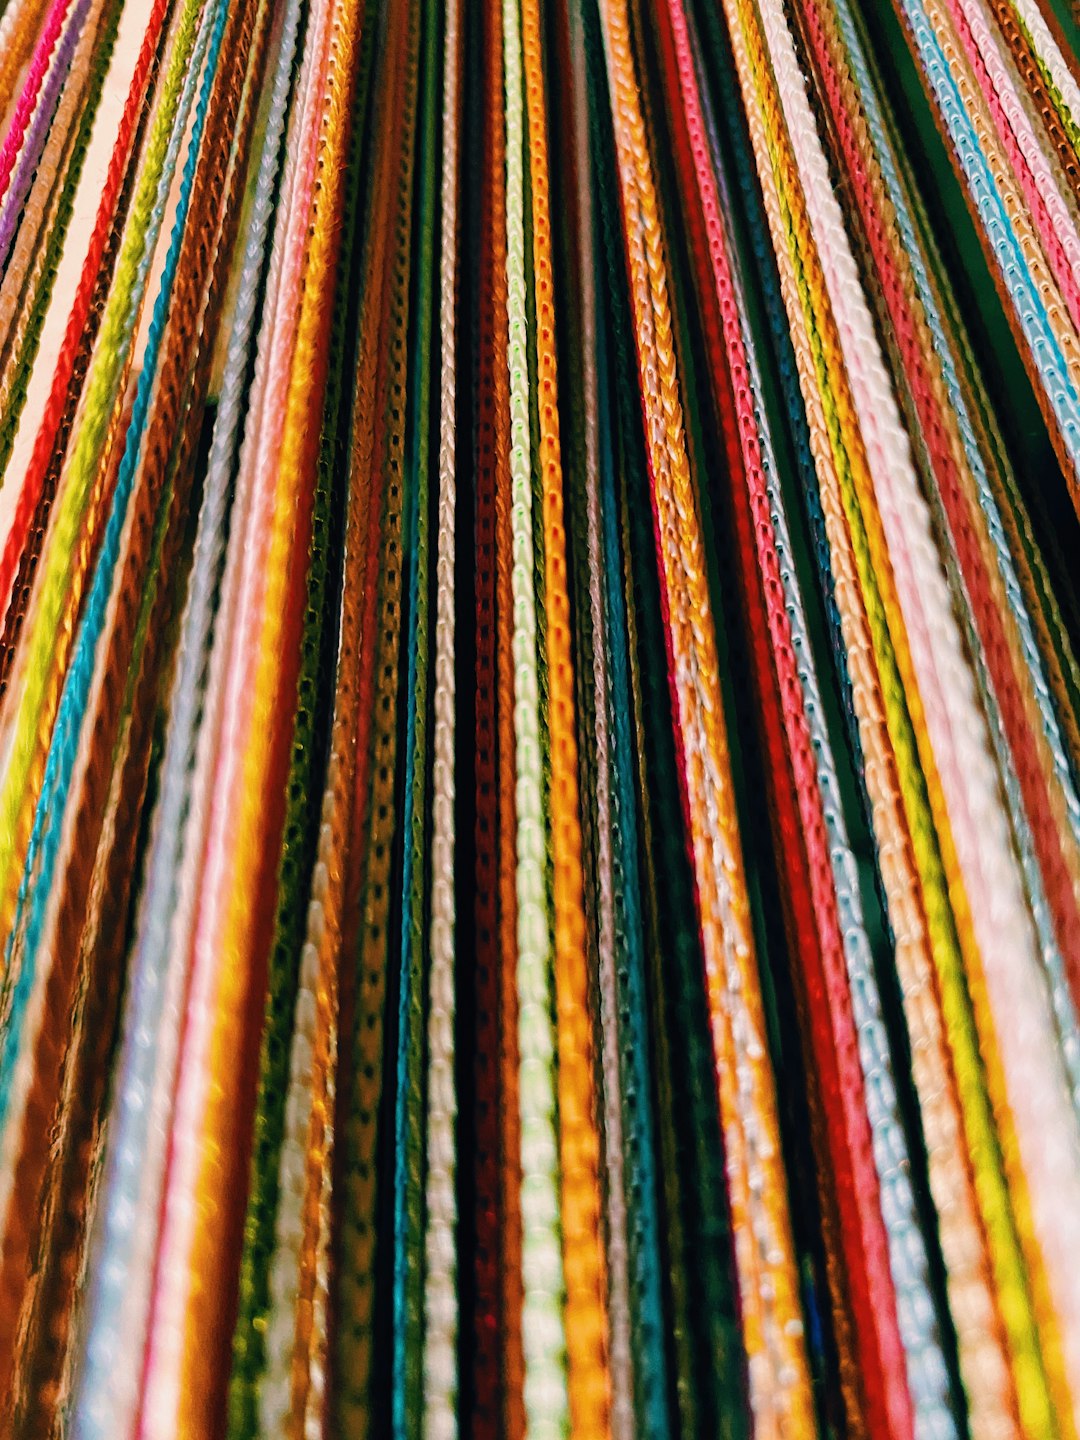  red yellow green and blue textile thread